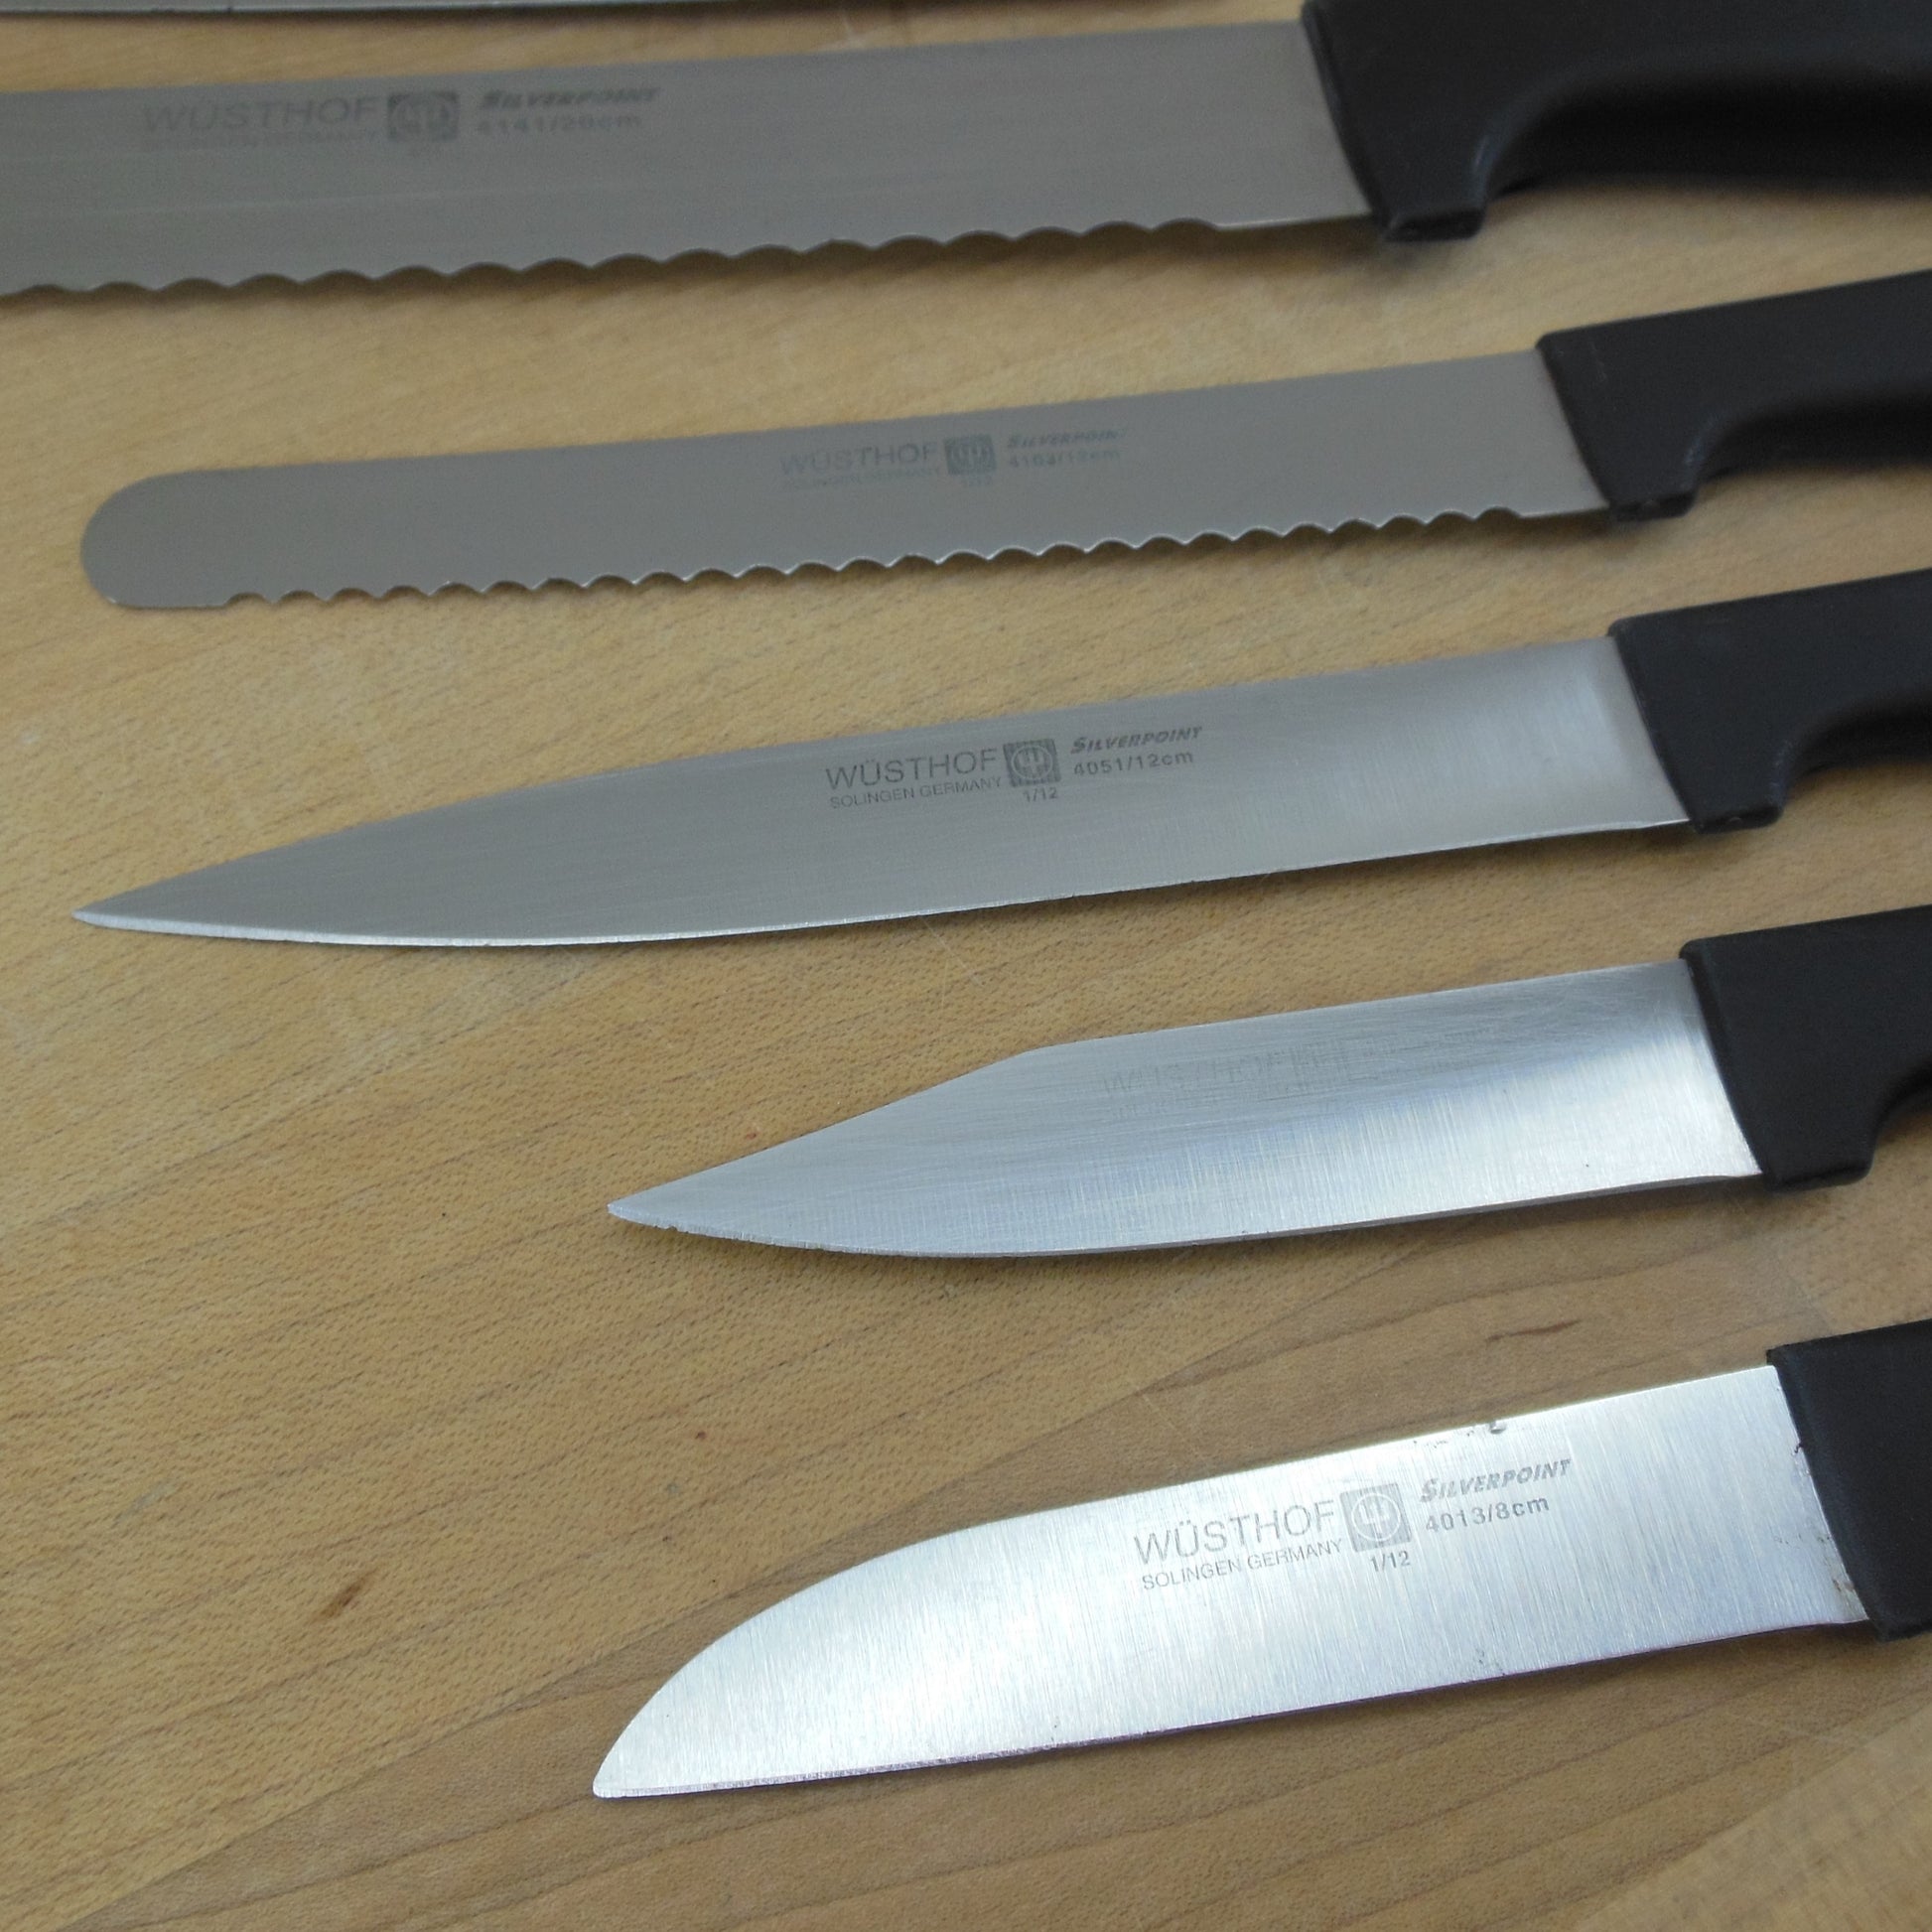 Wusthof Solingen Germany Silverpoint 8 Piece Stainless Knife Set